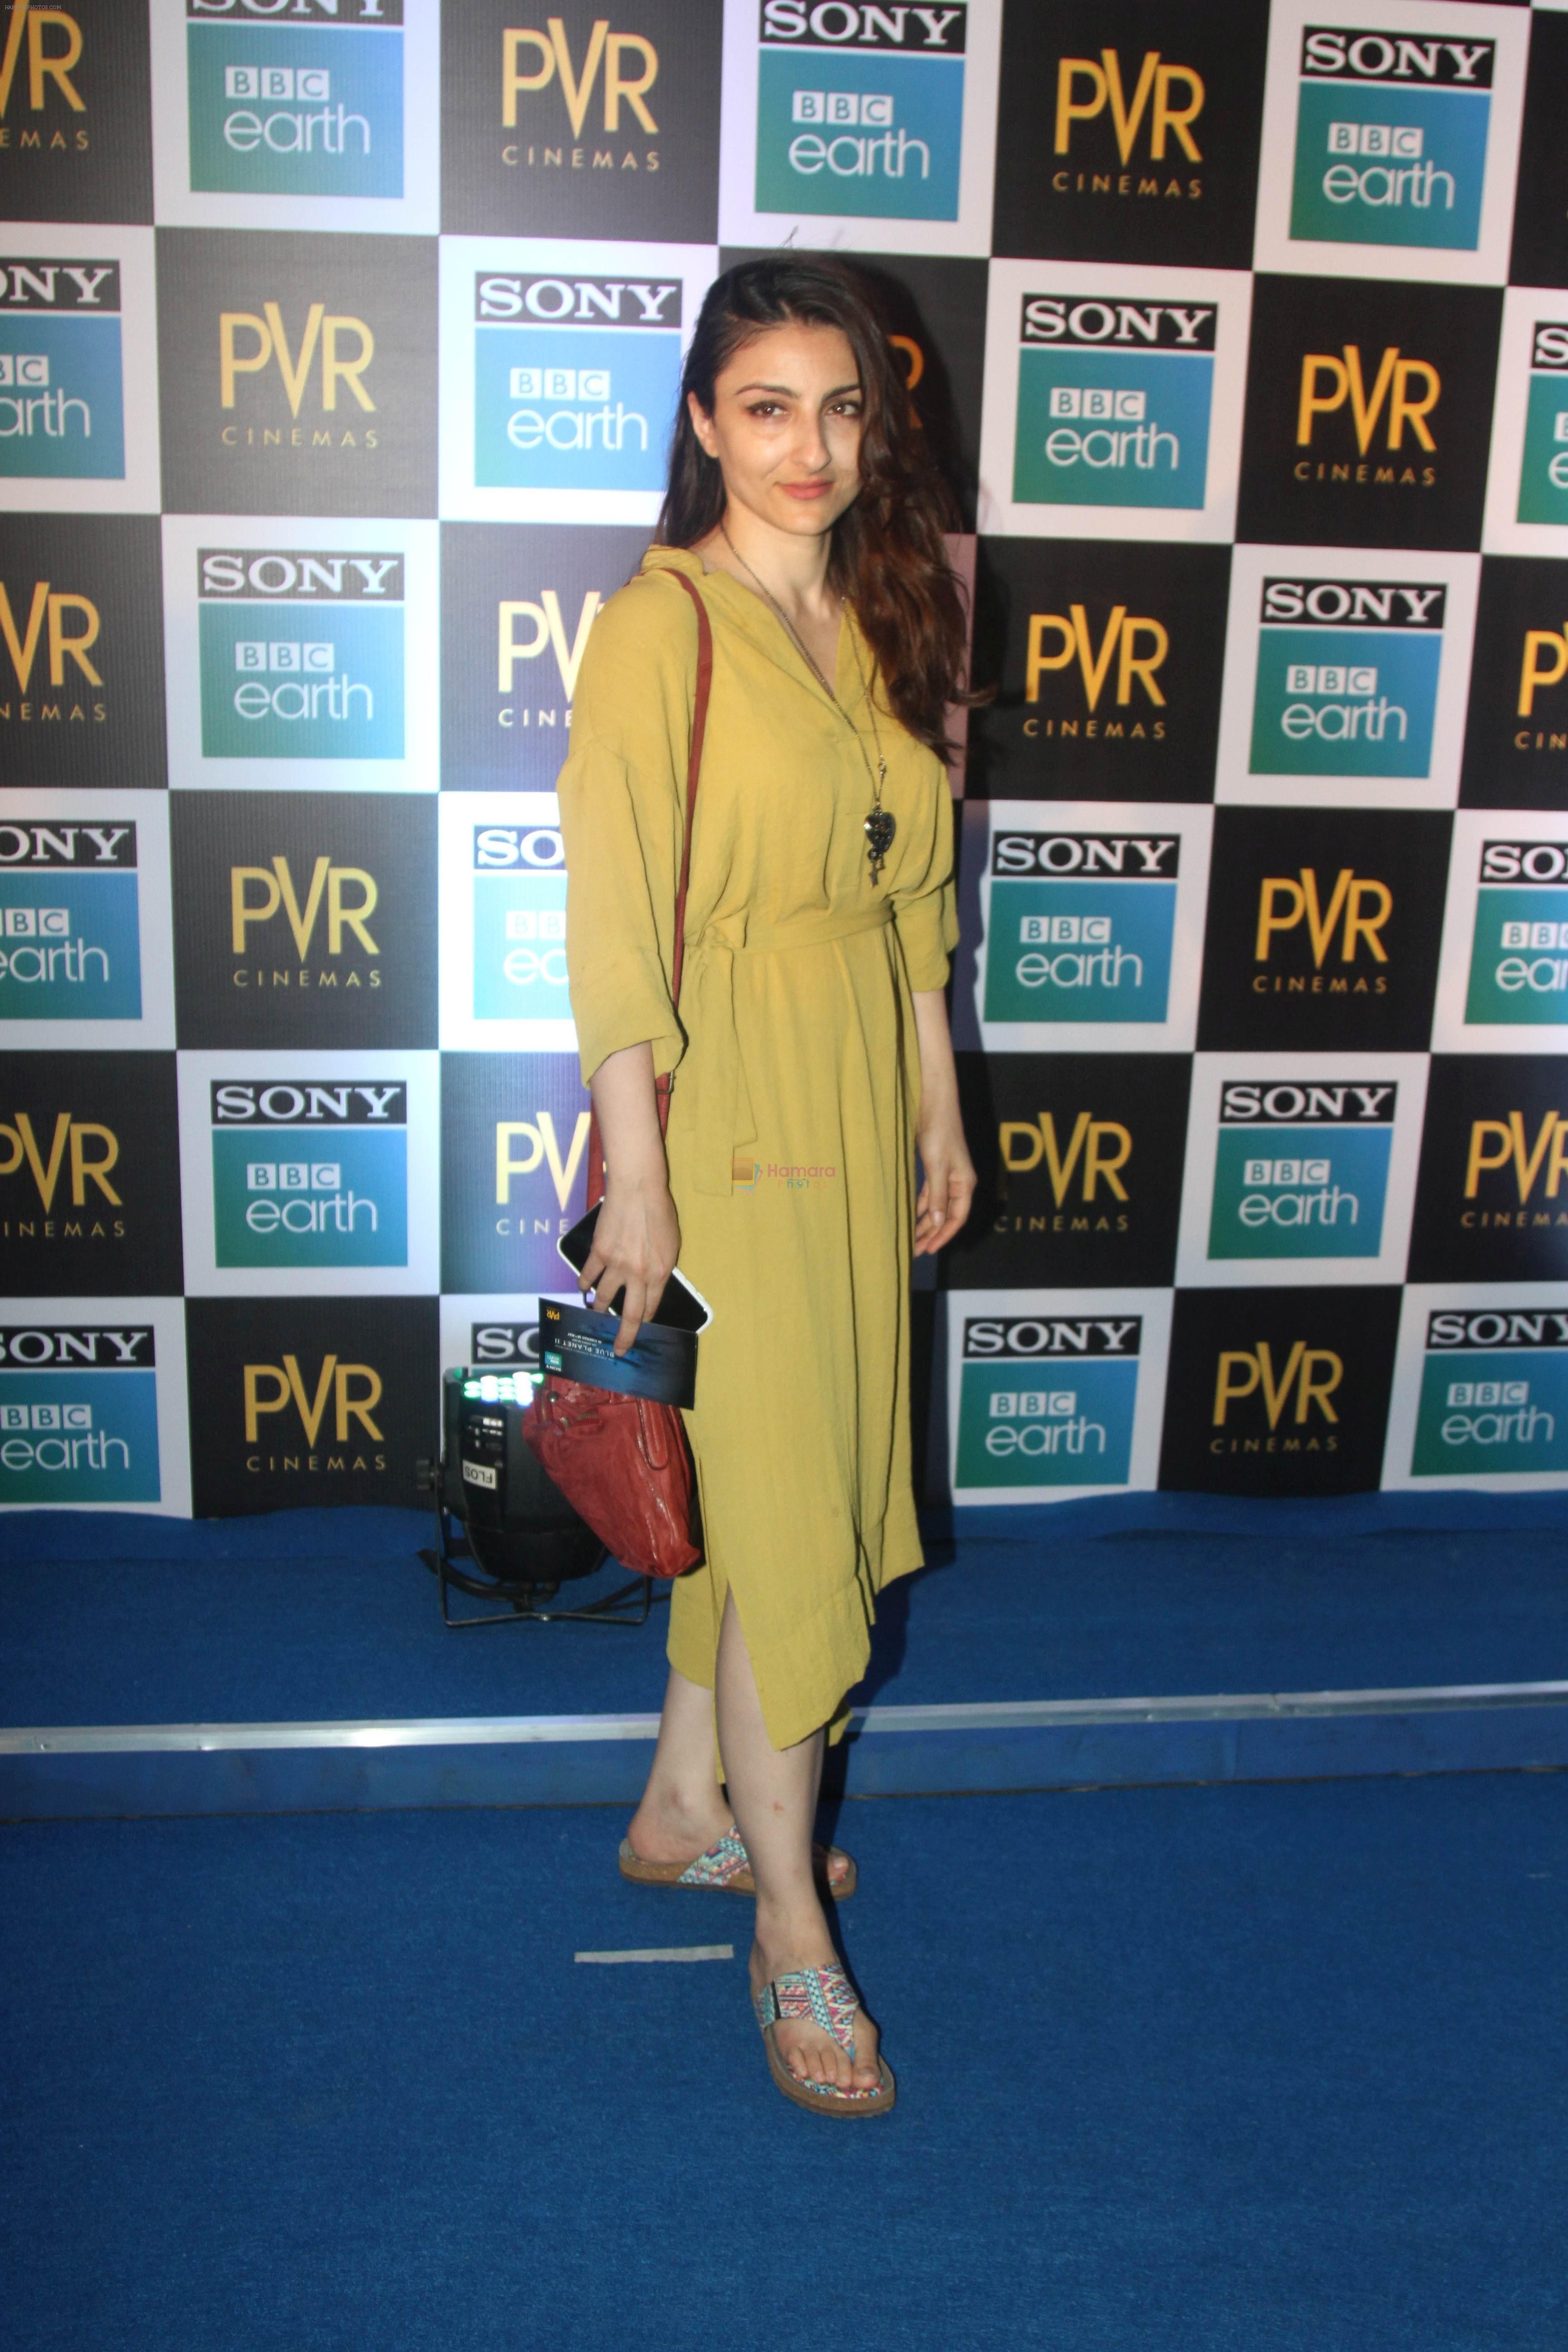 Soha Ali Khan at the Screening of Sony BBC Earth's film Blue Planet 2 at pvr icon in andheri on 15th May 2018